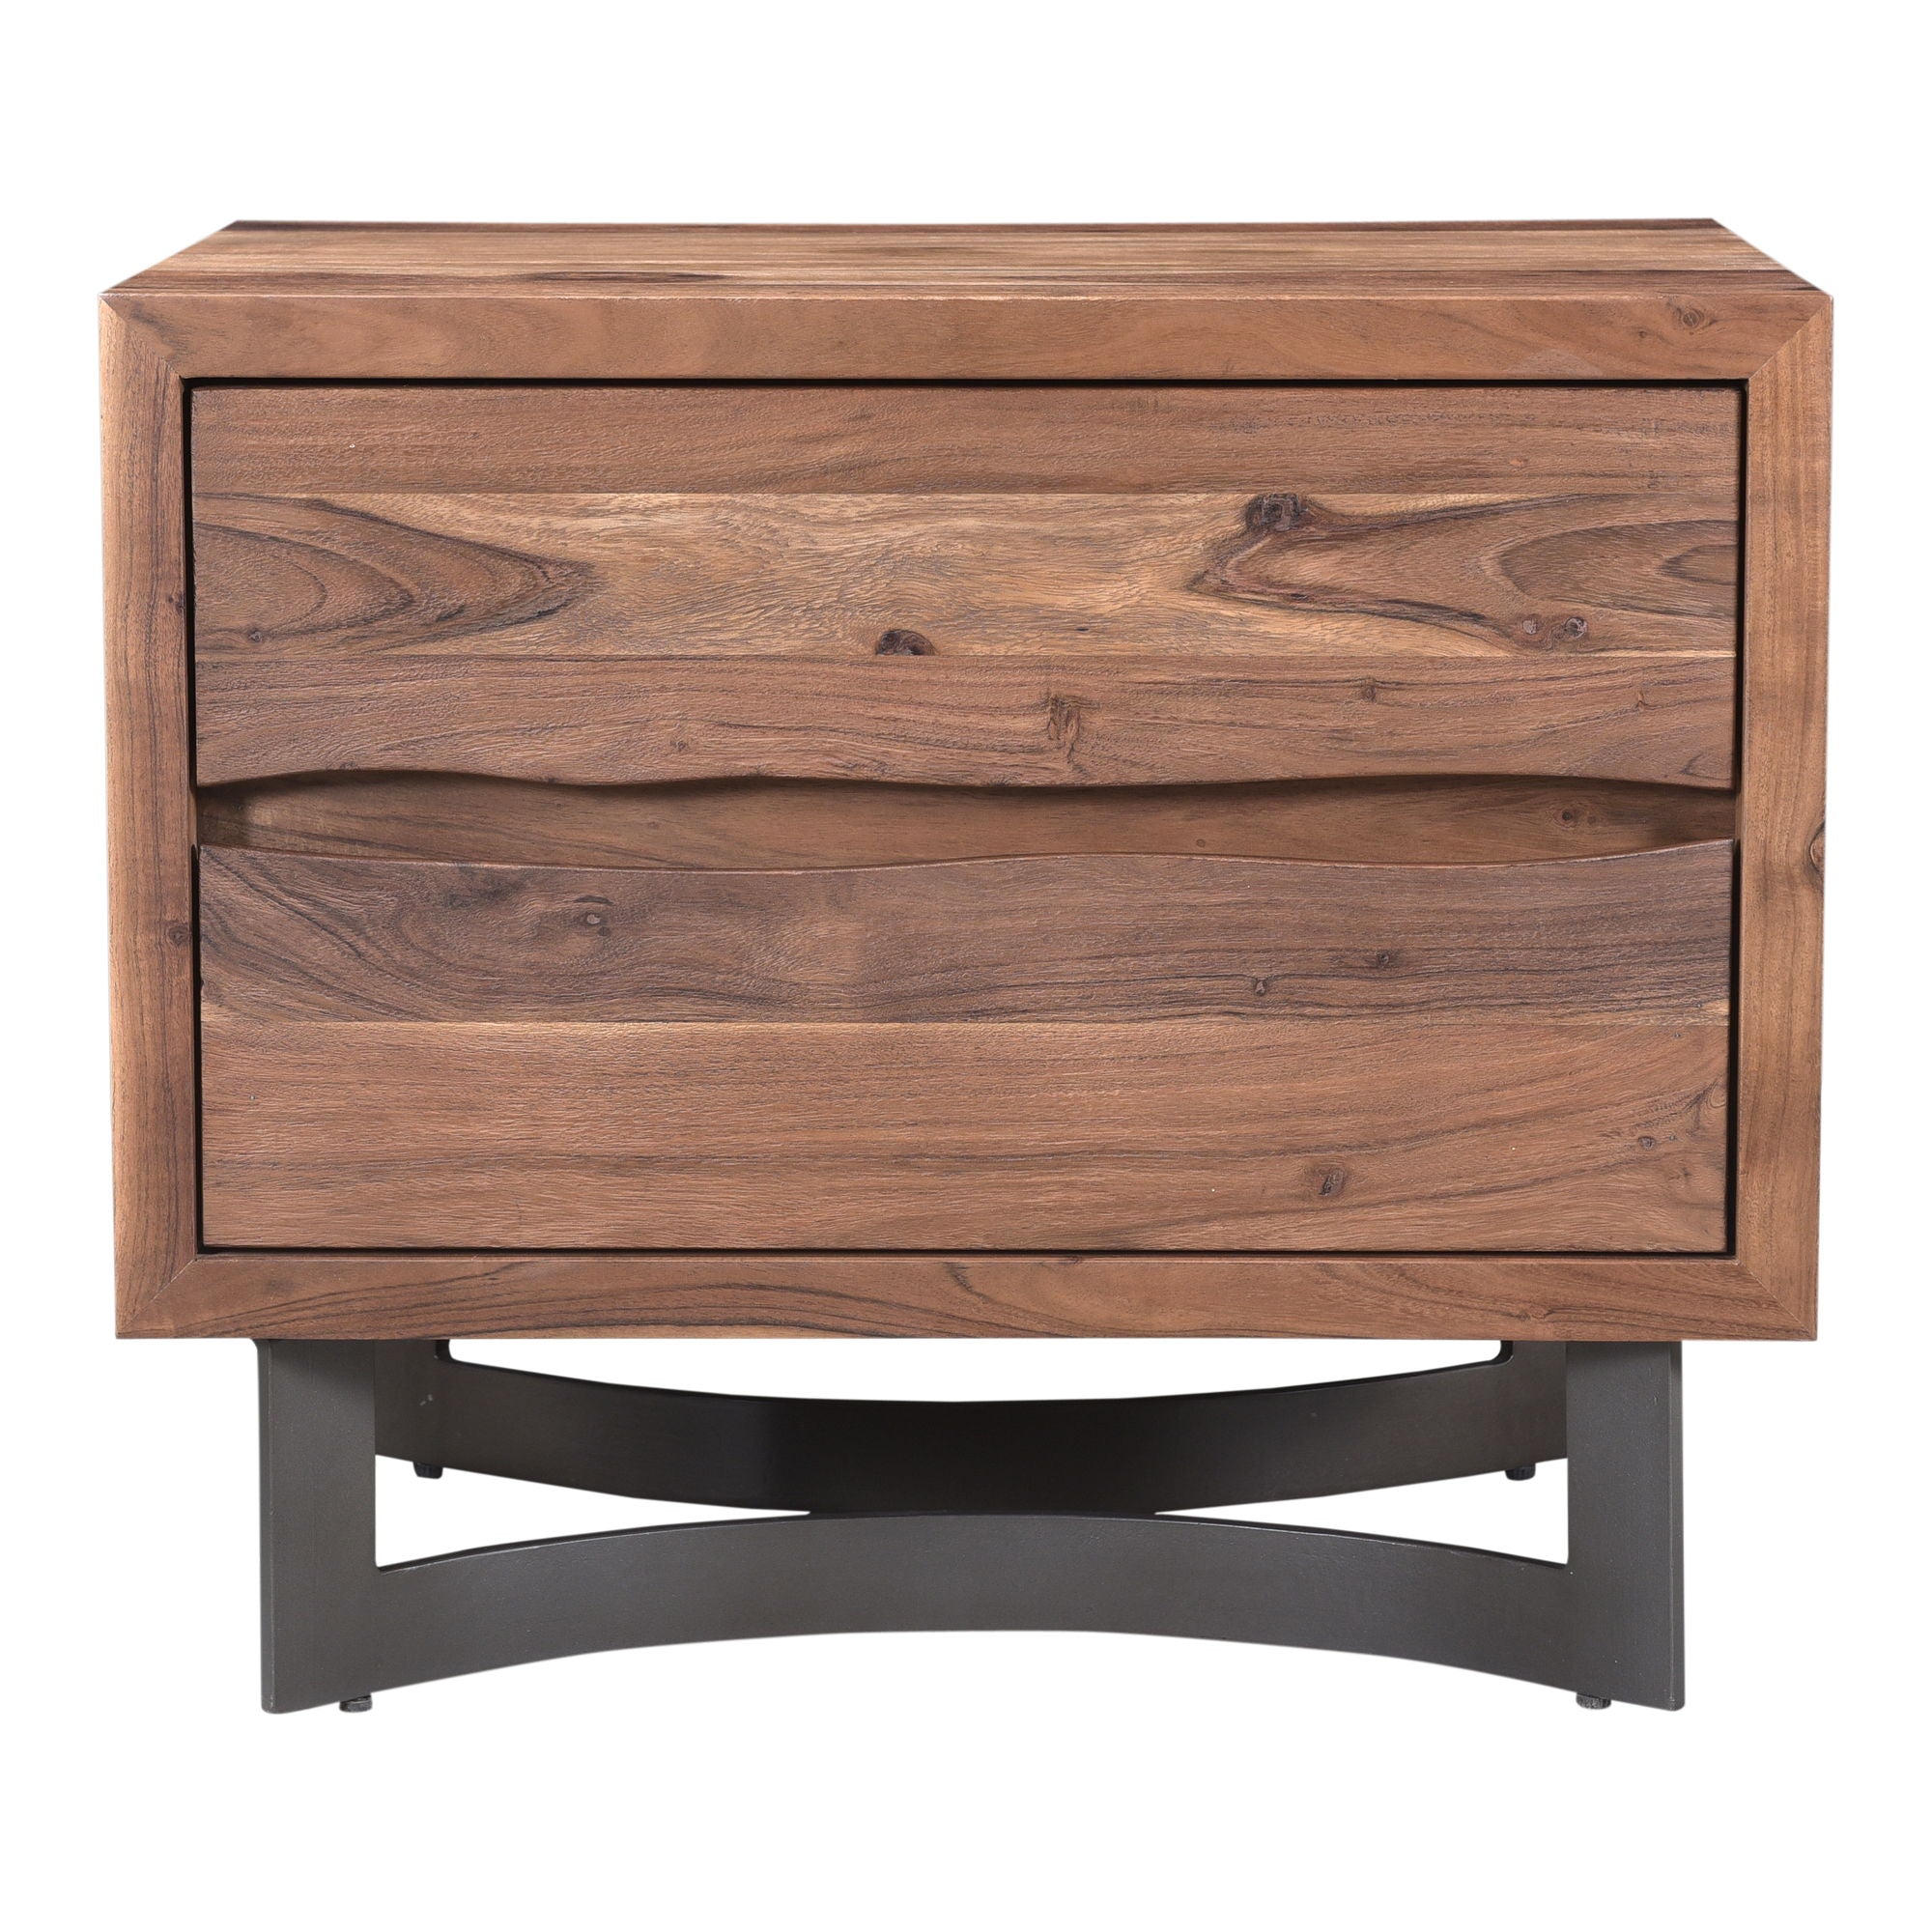 Bent - Nightstand - Natural Stain